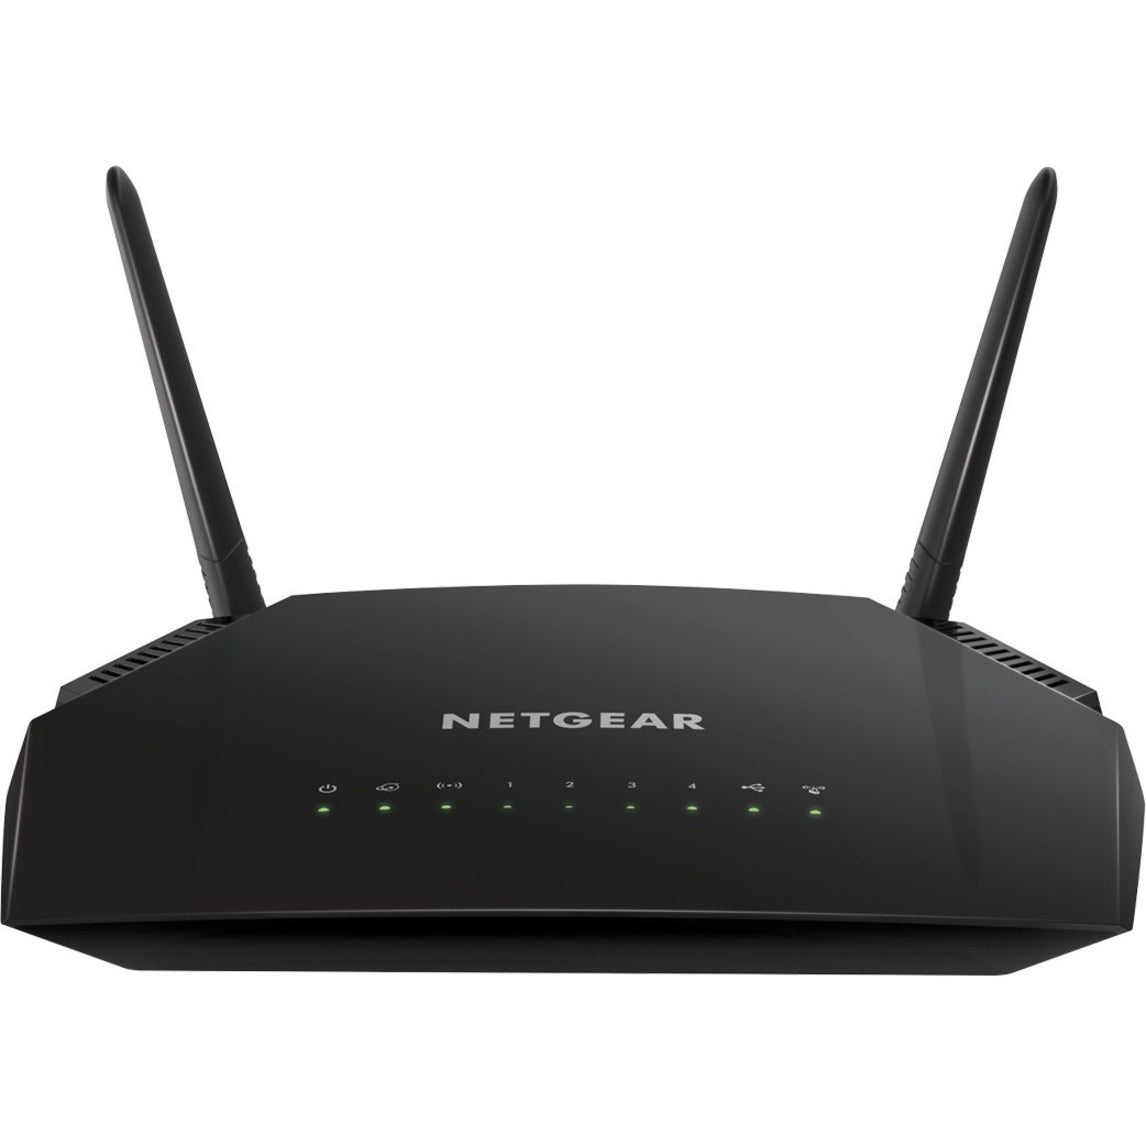 The NETGEAR AC1200 Dual Band Gigabit WiFi Router provides up to 1200Mbps speeds for up to 20 devices and 1200 sq ft coverage. (R6230-100NAS)